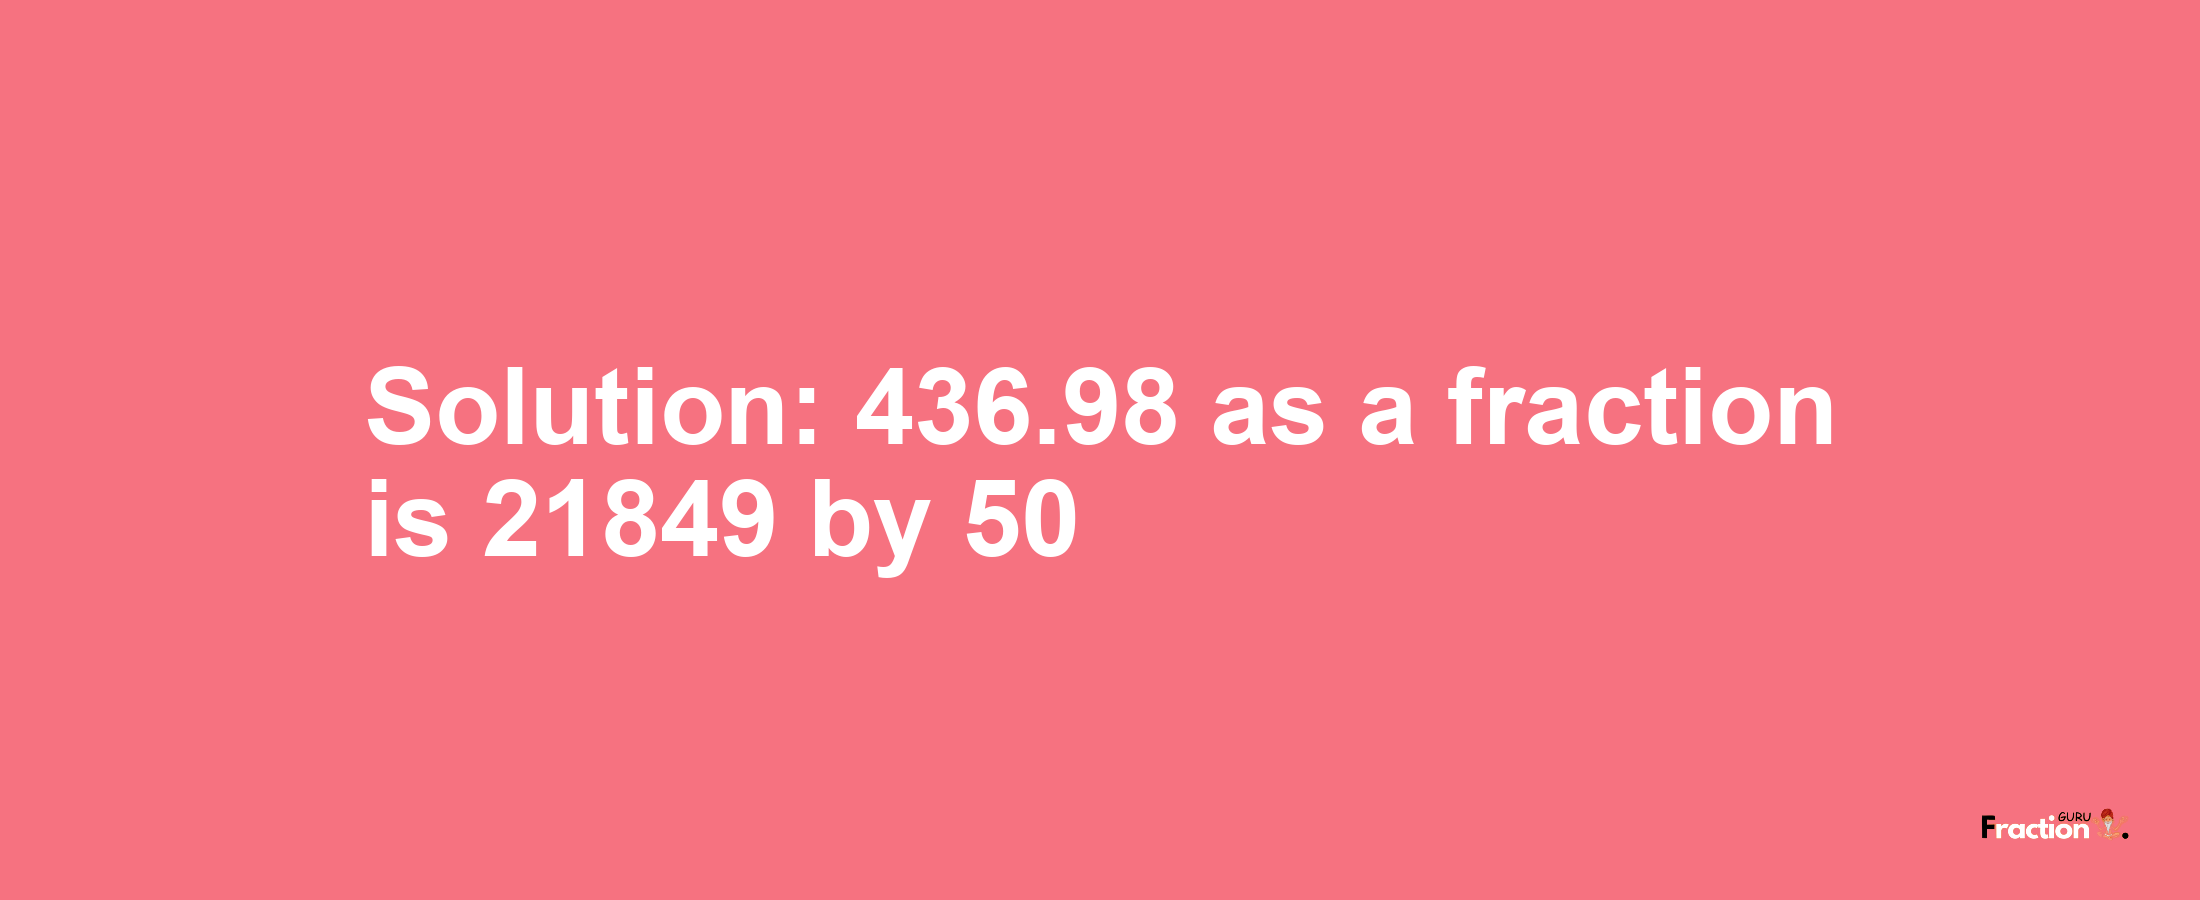 Solution:436.98 as a fraction is 21849/50